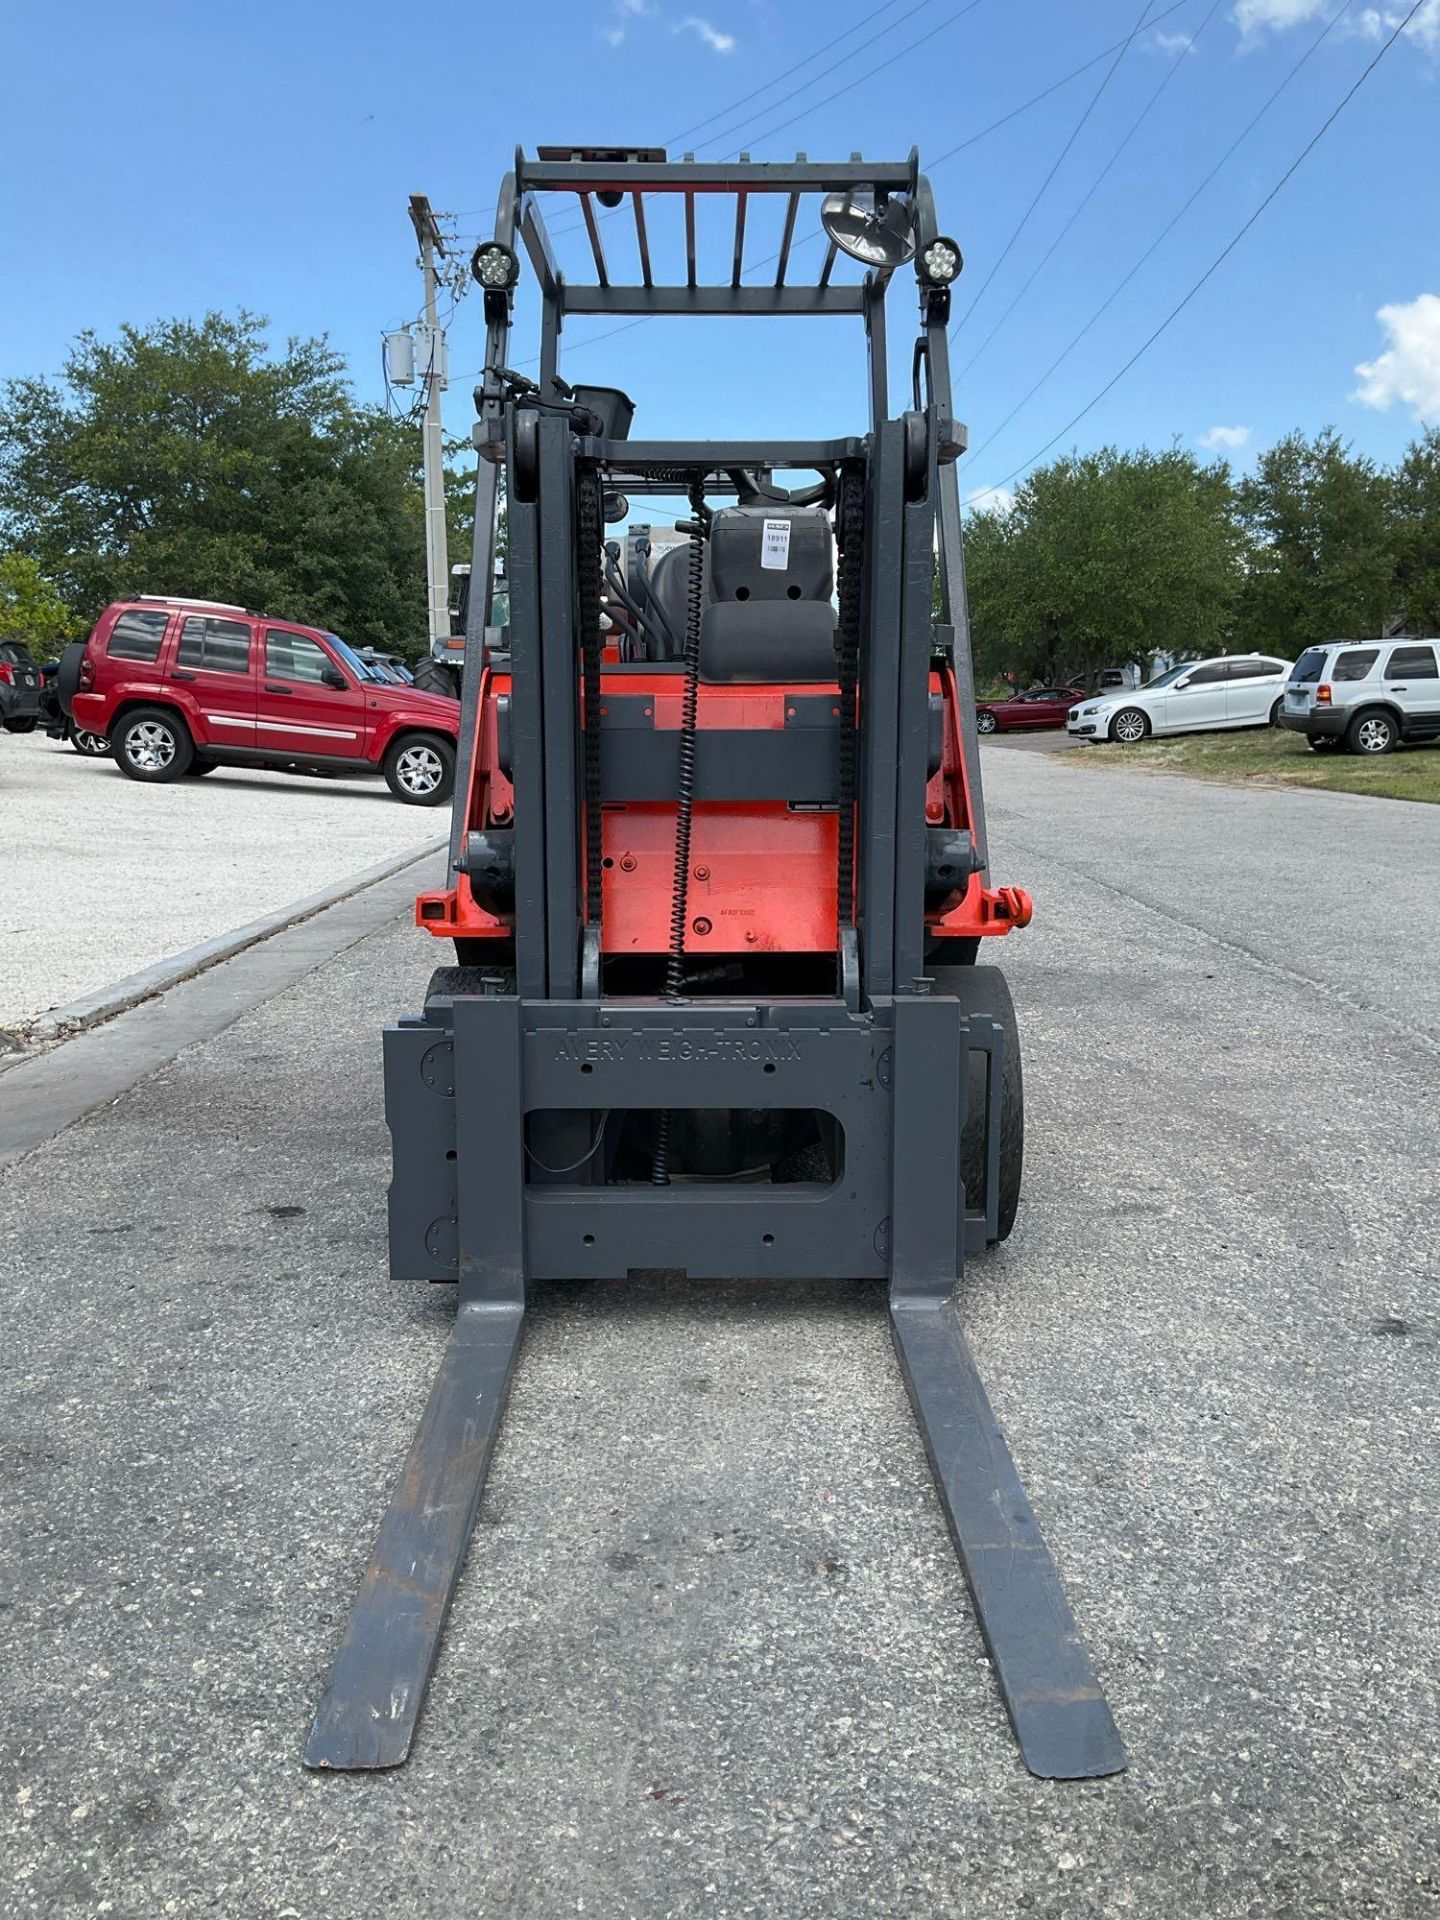 MITSUBISHI FORKLIFT MODEL FGC25N-LP, LP POWERED, APPROX MAX CAPACITY 5000LBS - Image 8 of 13